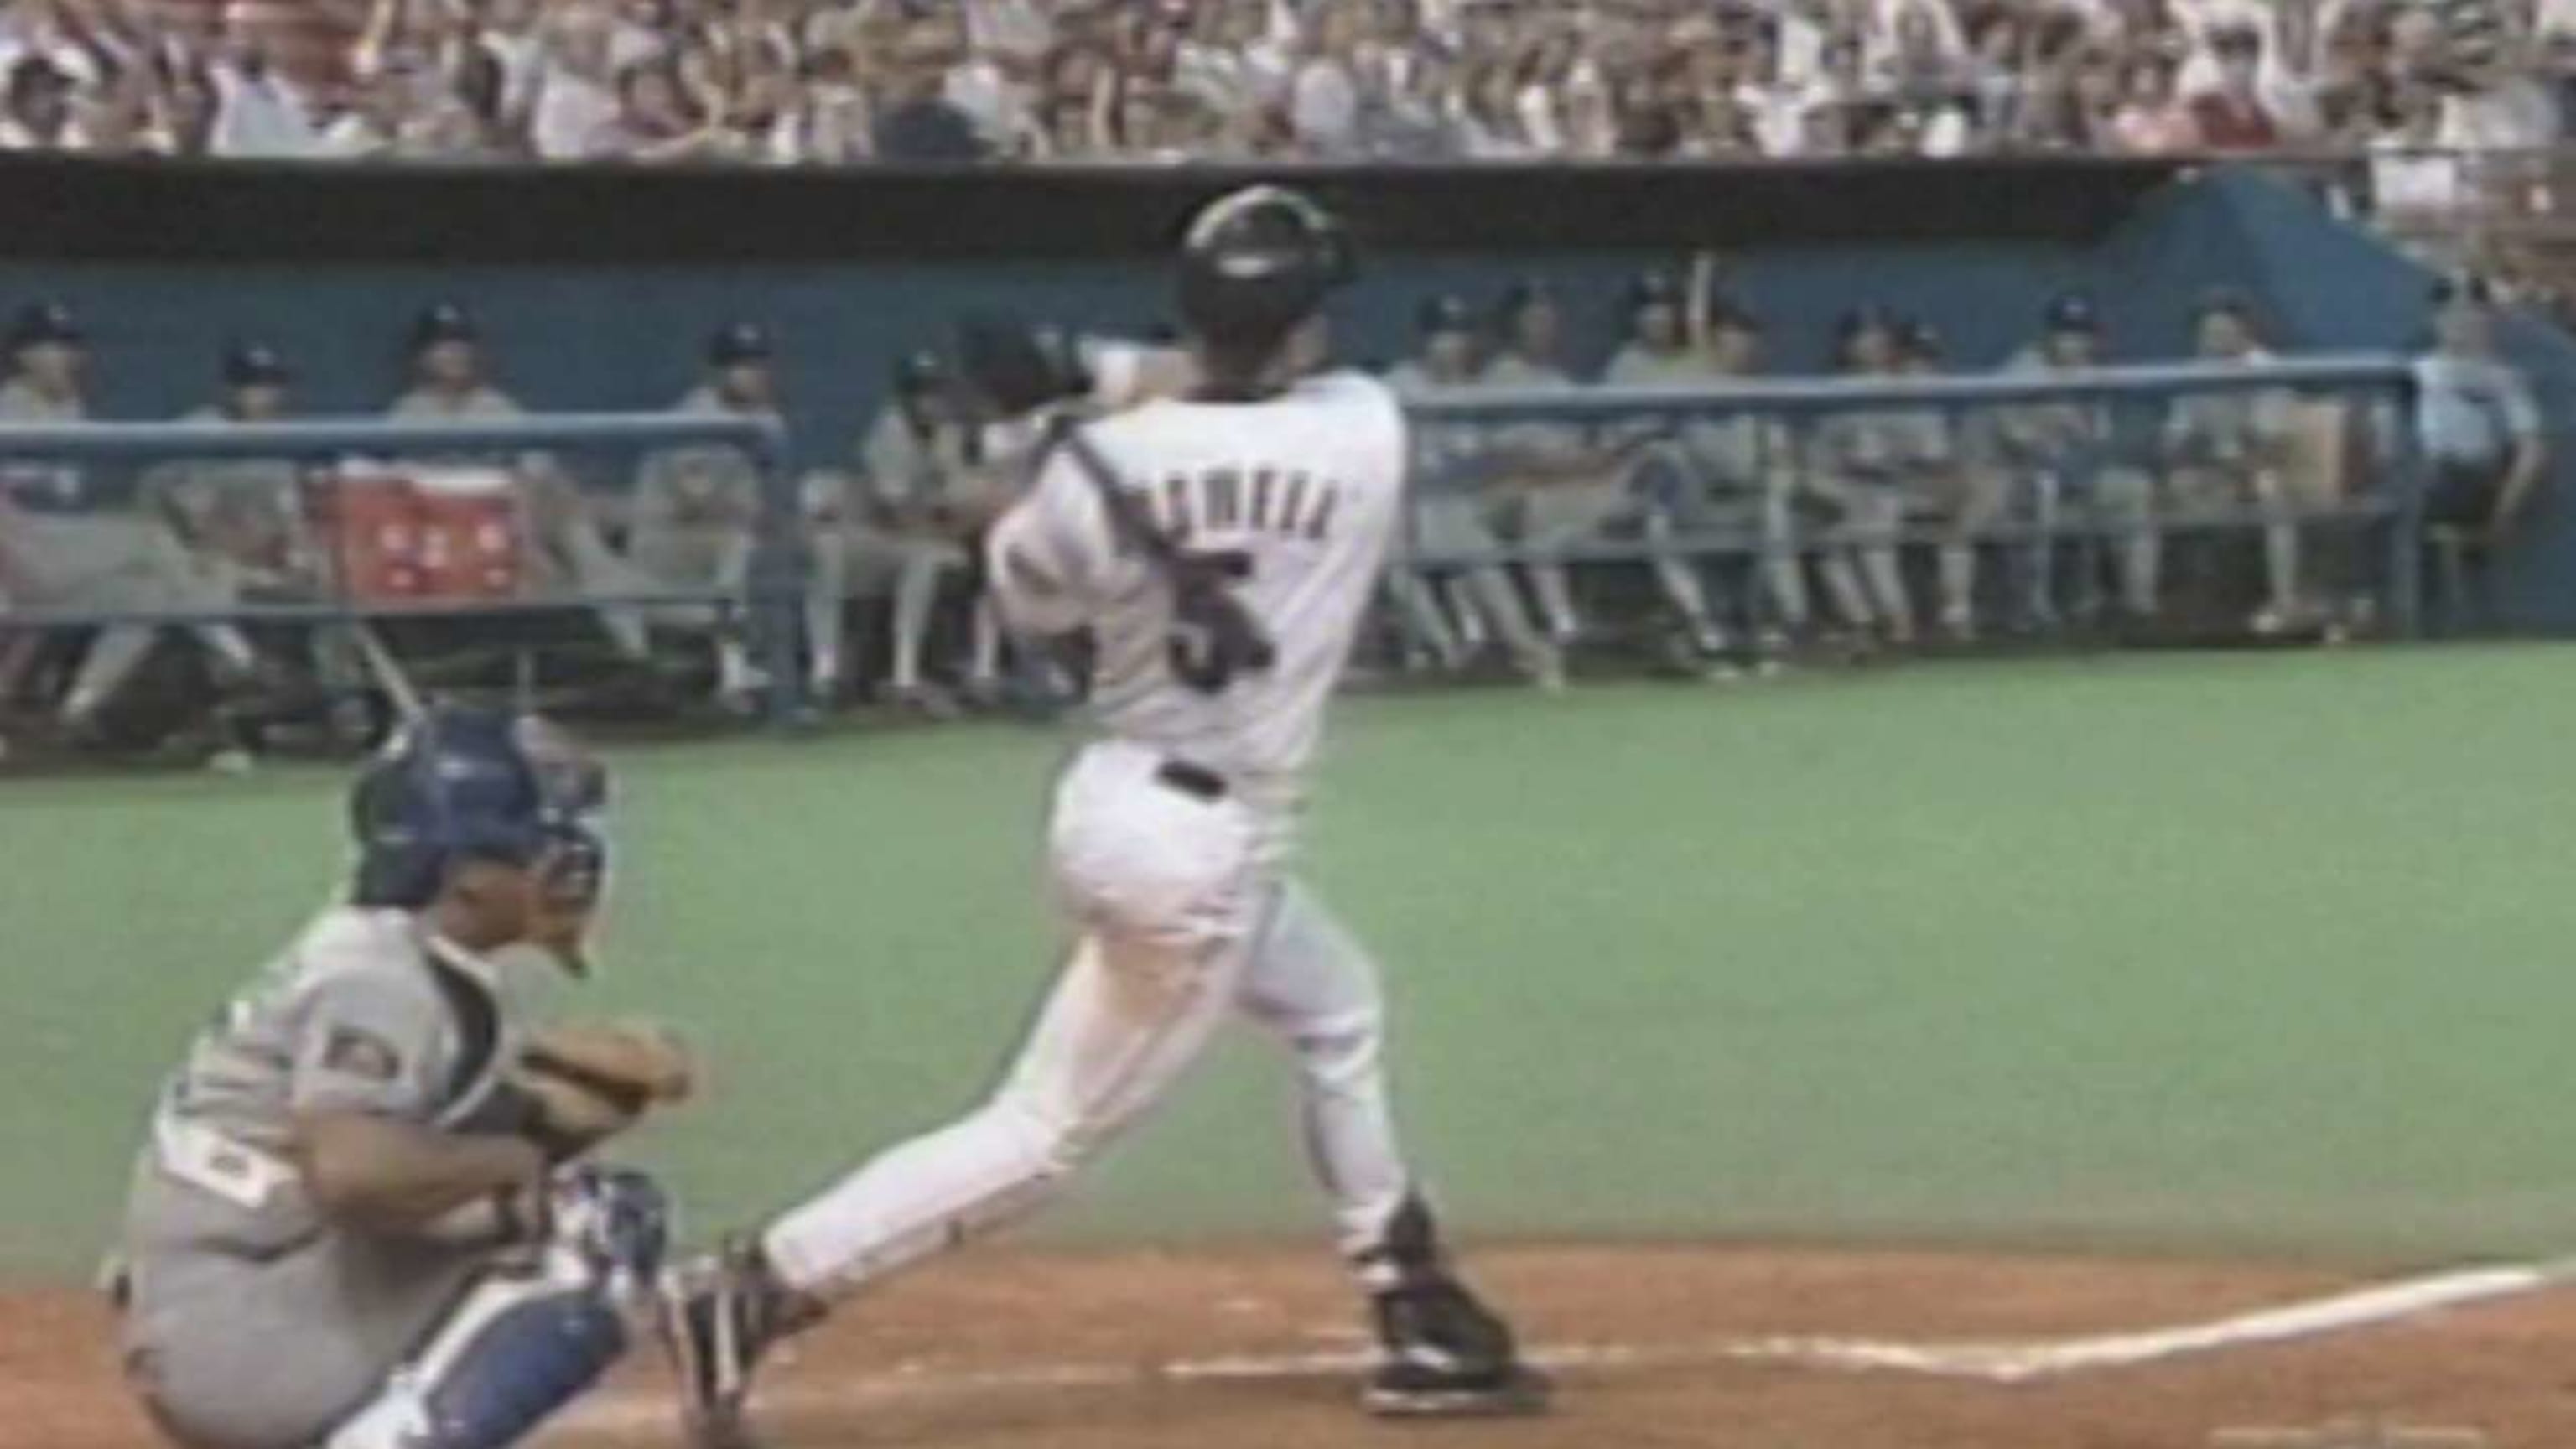 Jeff Bagwell's greatest moments from his Hall of Fame career